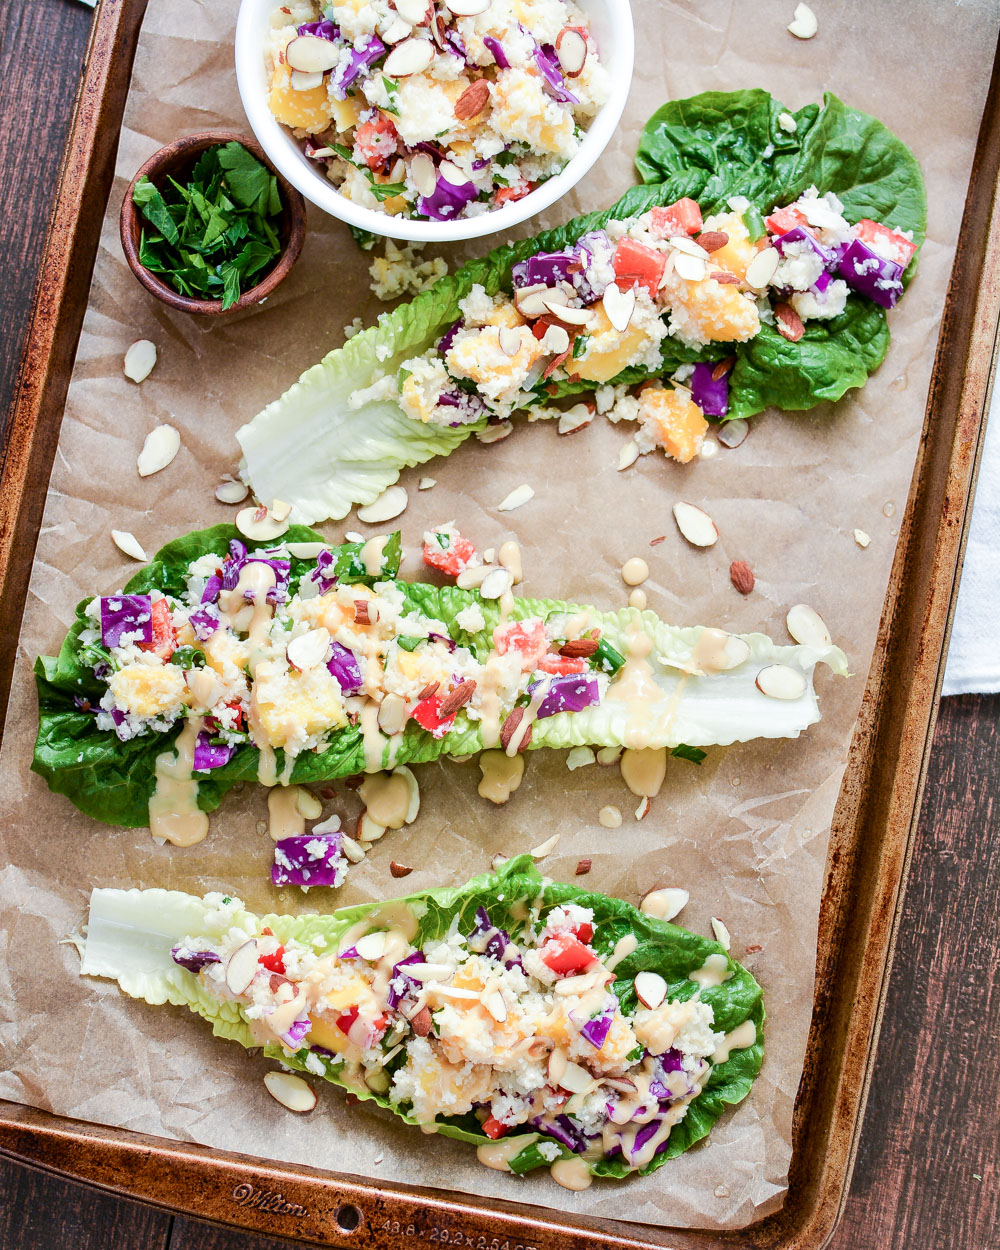 Thai Cauliflower Salad Lettuce Cups is a light and healthy lunch or dinner recipe!